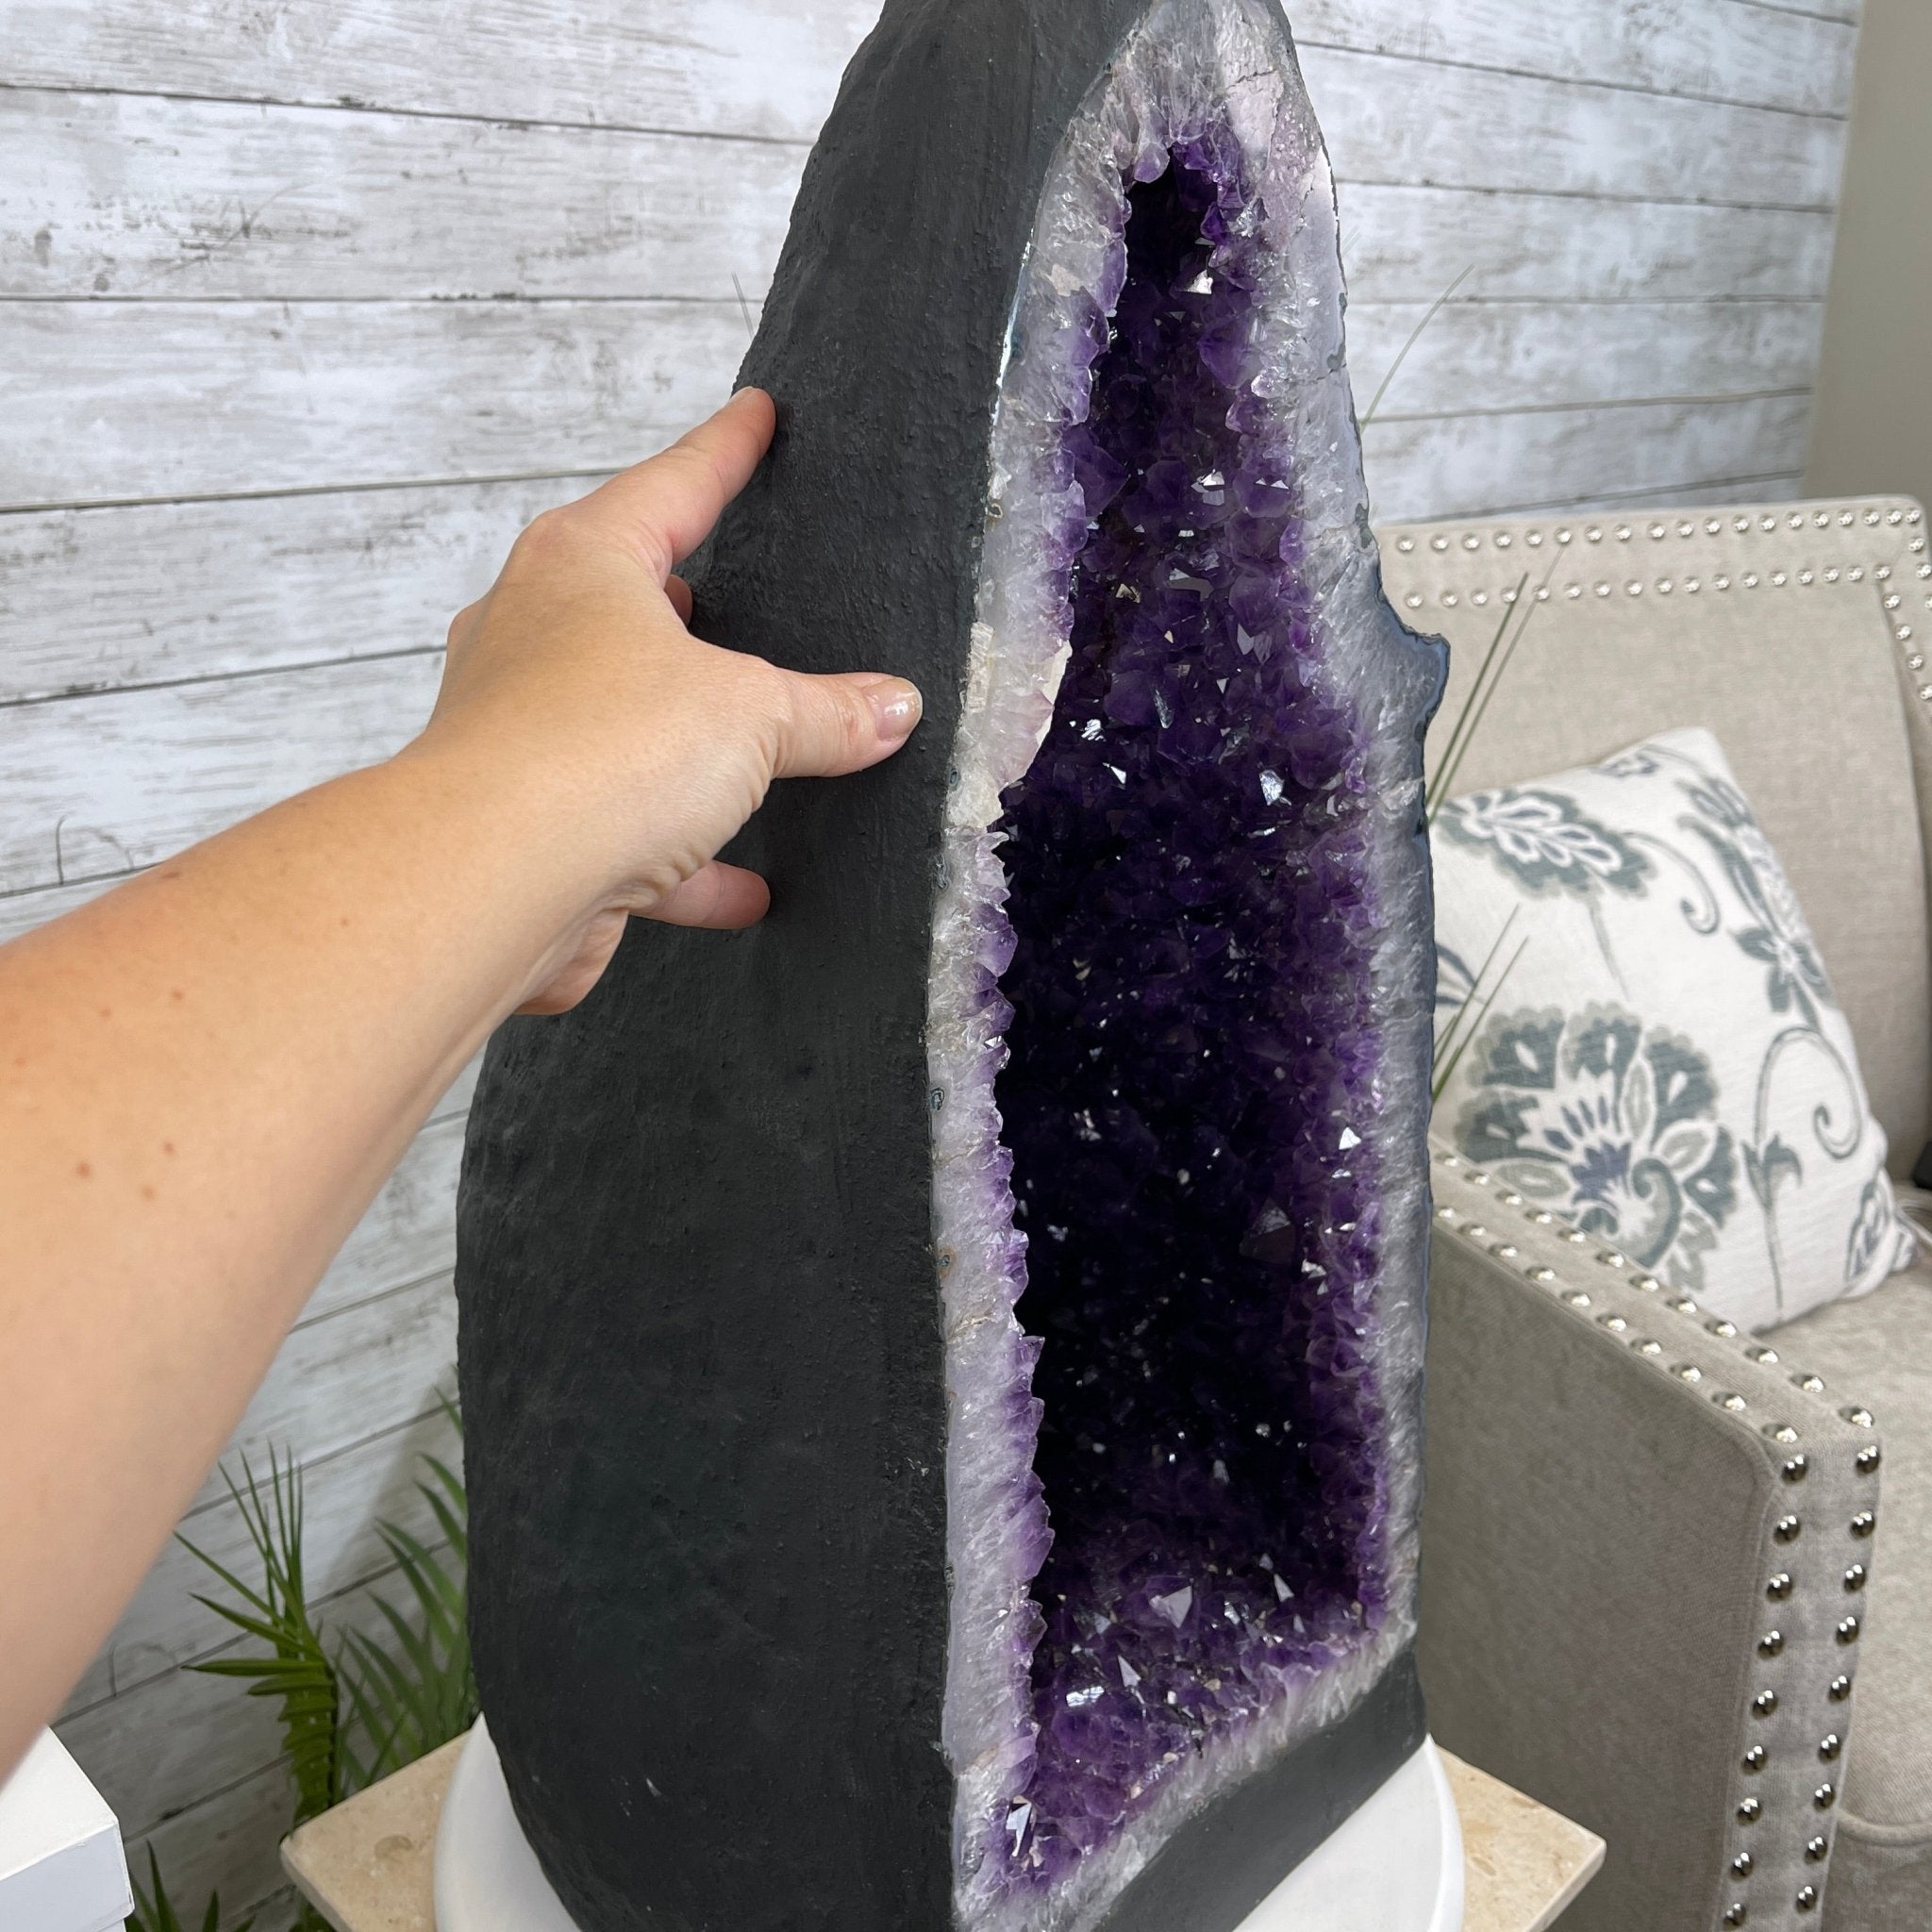 Extra Quality Brazilian Amethyst Cathedral, 25” tall & 119.6 lbs #5601-0651 by Brazil Gems - Brazil GemsBrazil GemsExtra Quality Brazilian Amethyst Cathedral, 25” tall & 119.6 lbs #5601-0651 by Brazil GemsCathedrals5601-0651